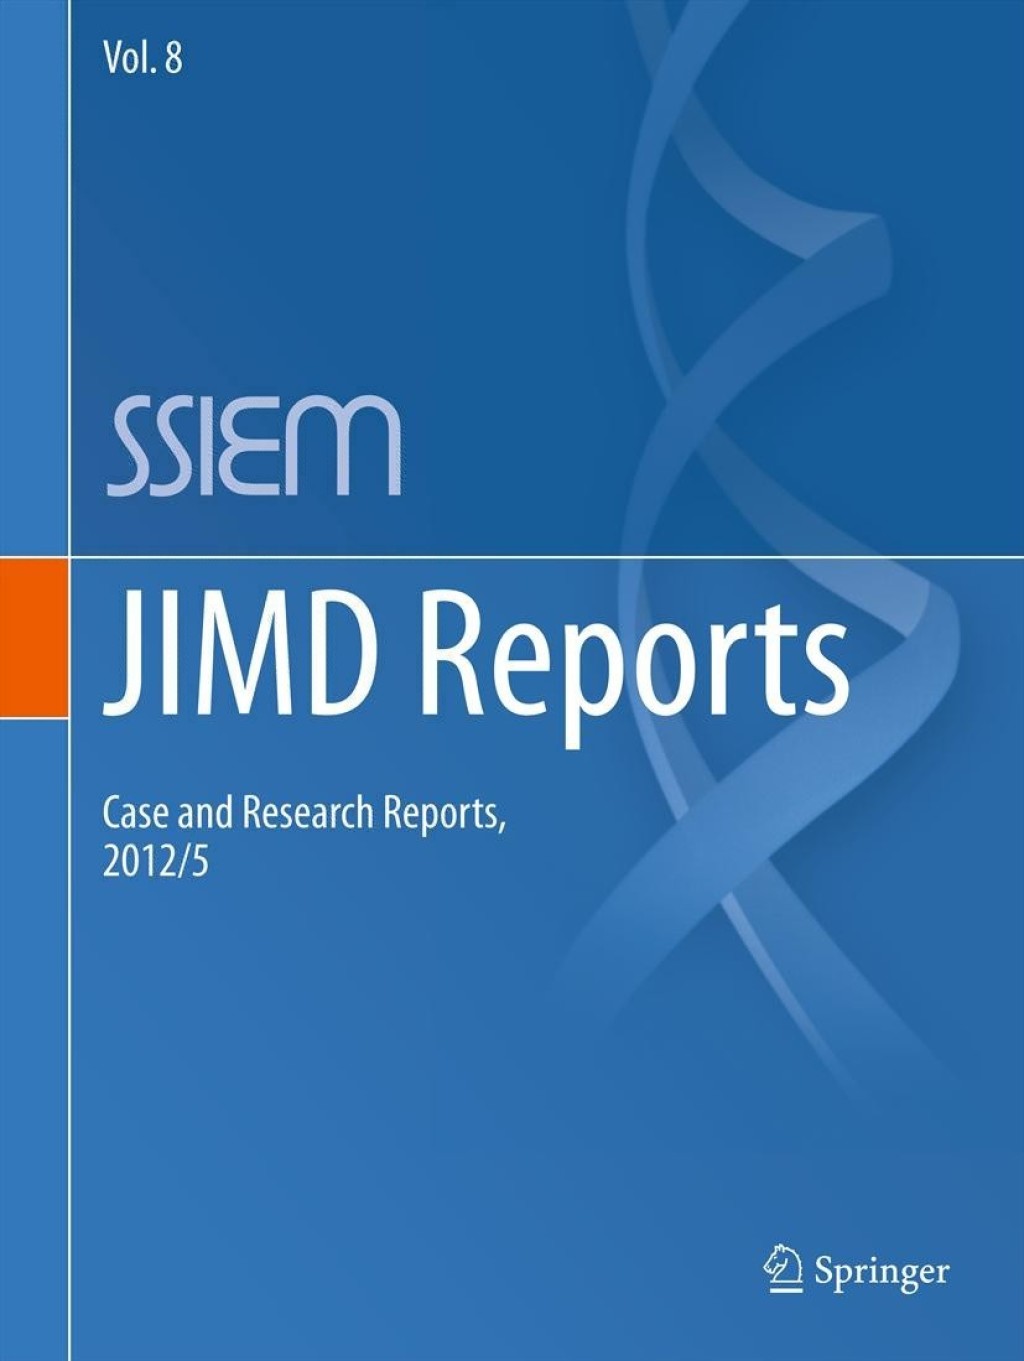 JIMD Reports - Case and Research Reports  2012/5 (eBook) - Johannes Zschocke,